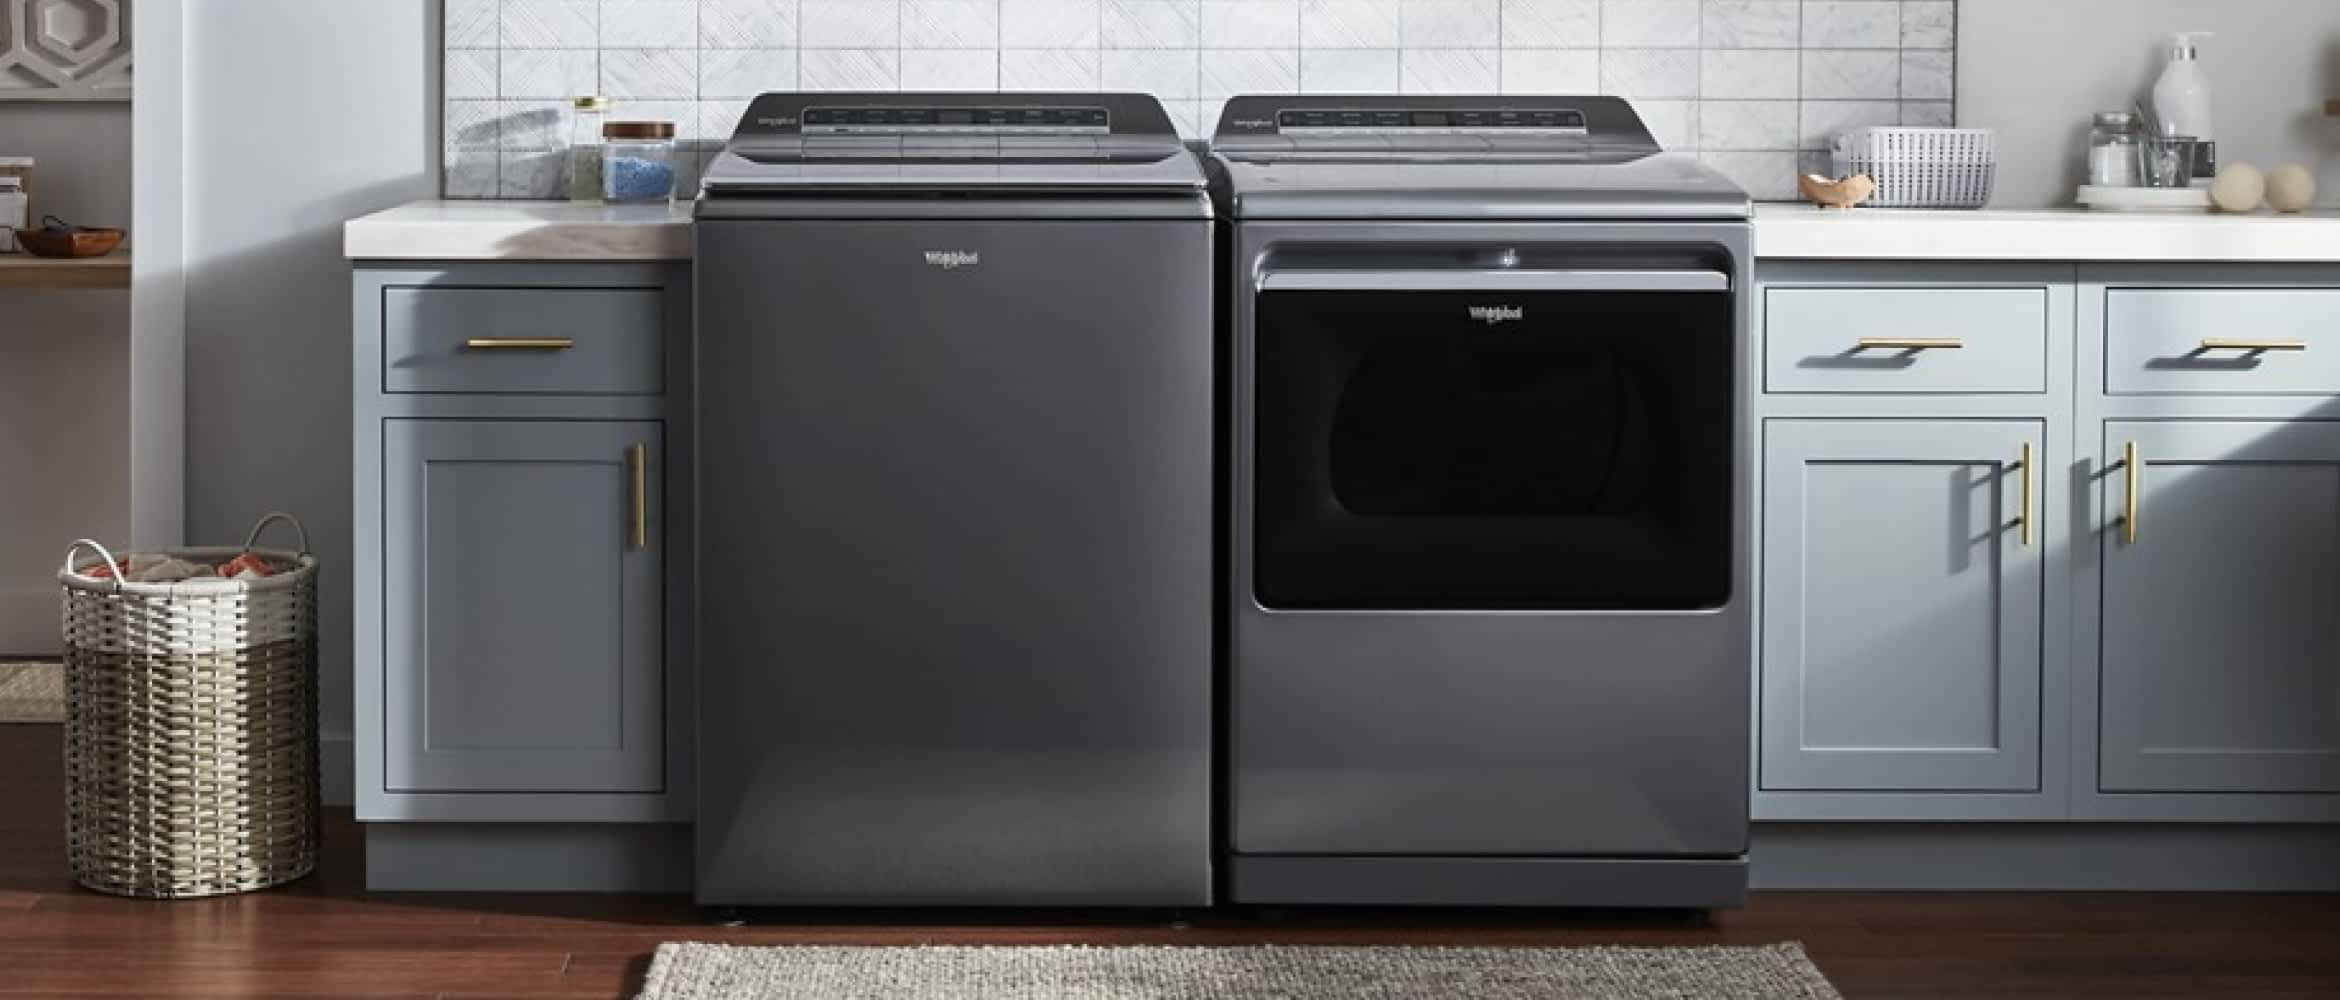 A Whirlpool® Smart Washer & Dryer Set with a Chrome Shadow Finish